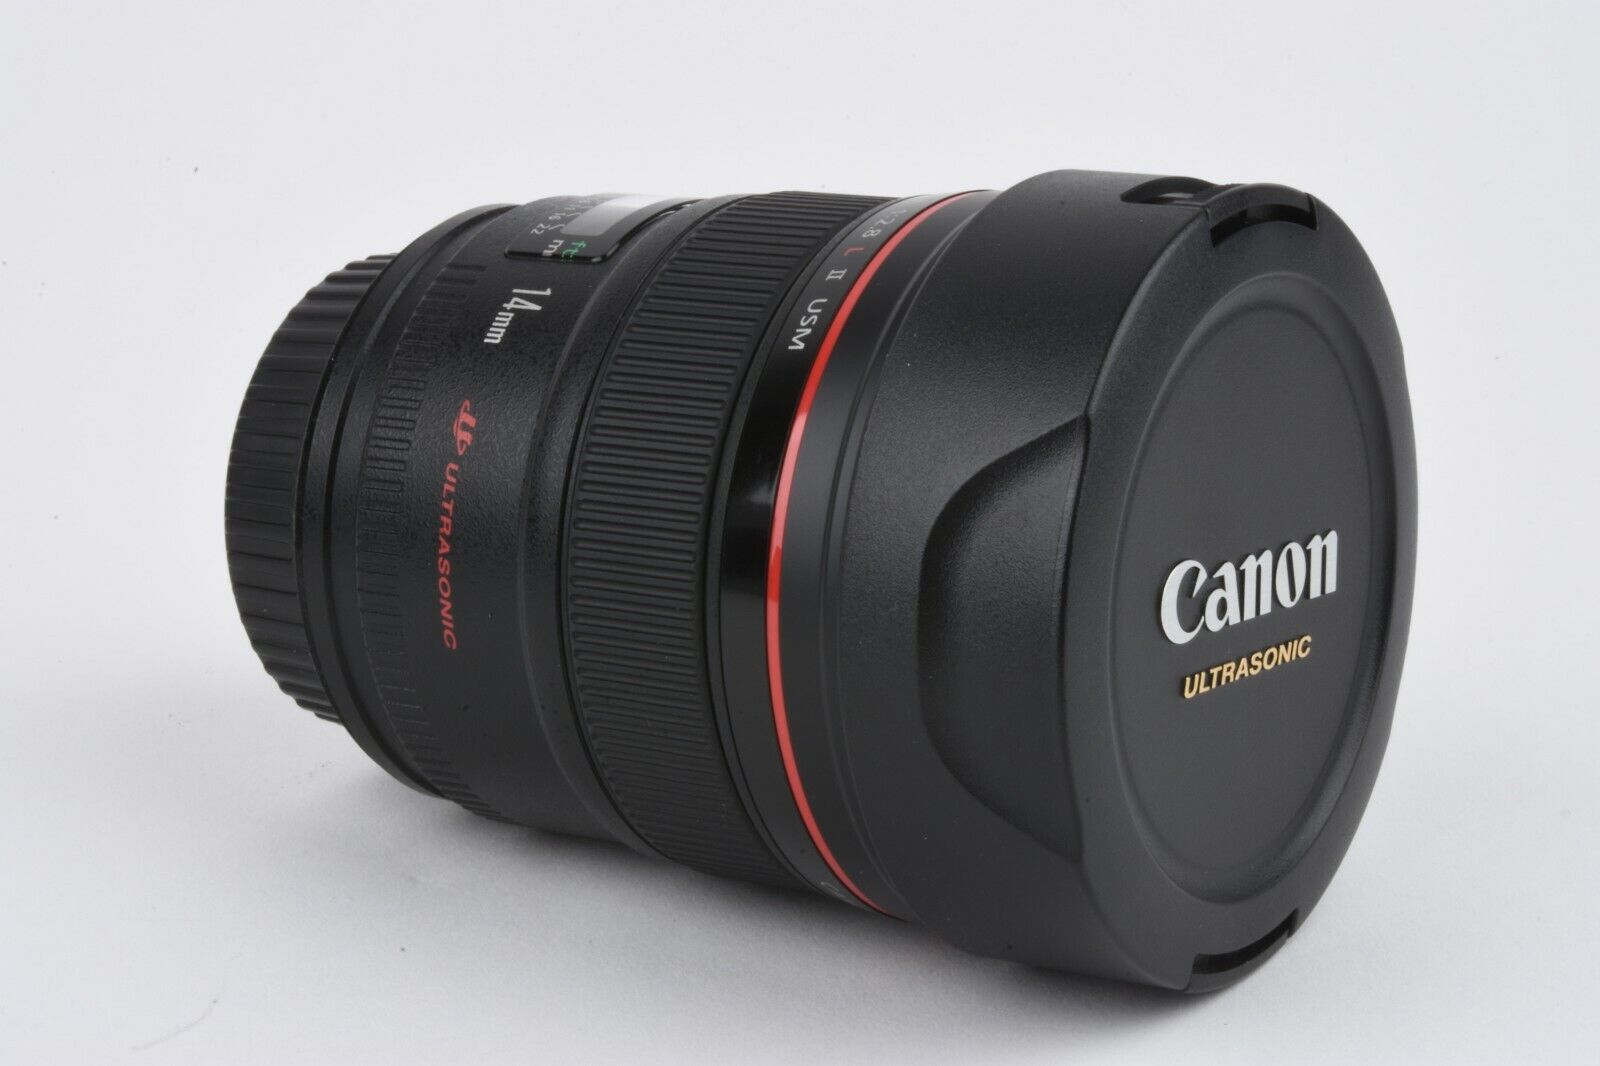 MINT- CANON EF 14mm f2.8L II USM WIDE ANGLE LENS, BOXED, POUCH